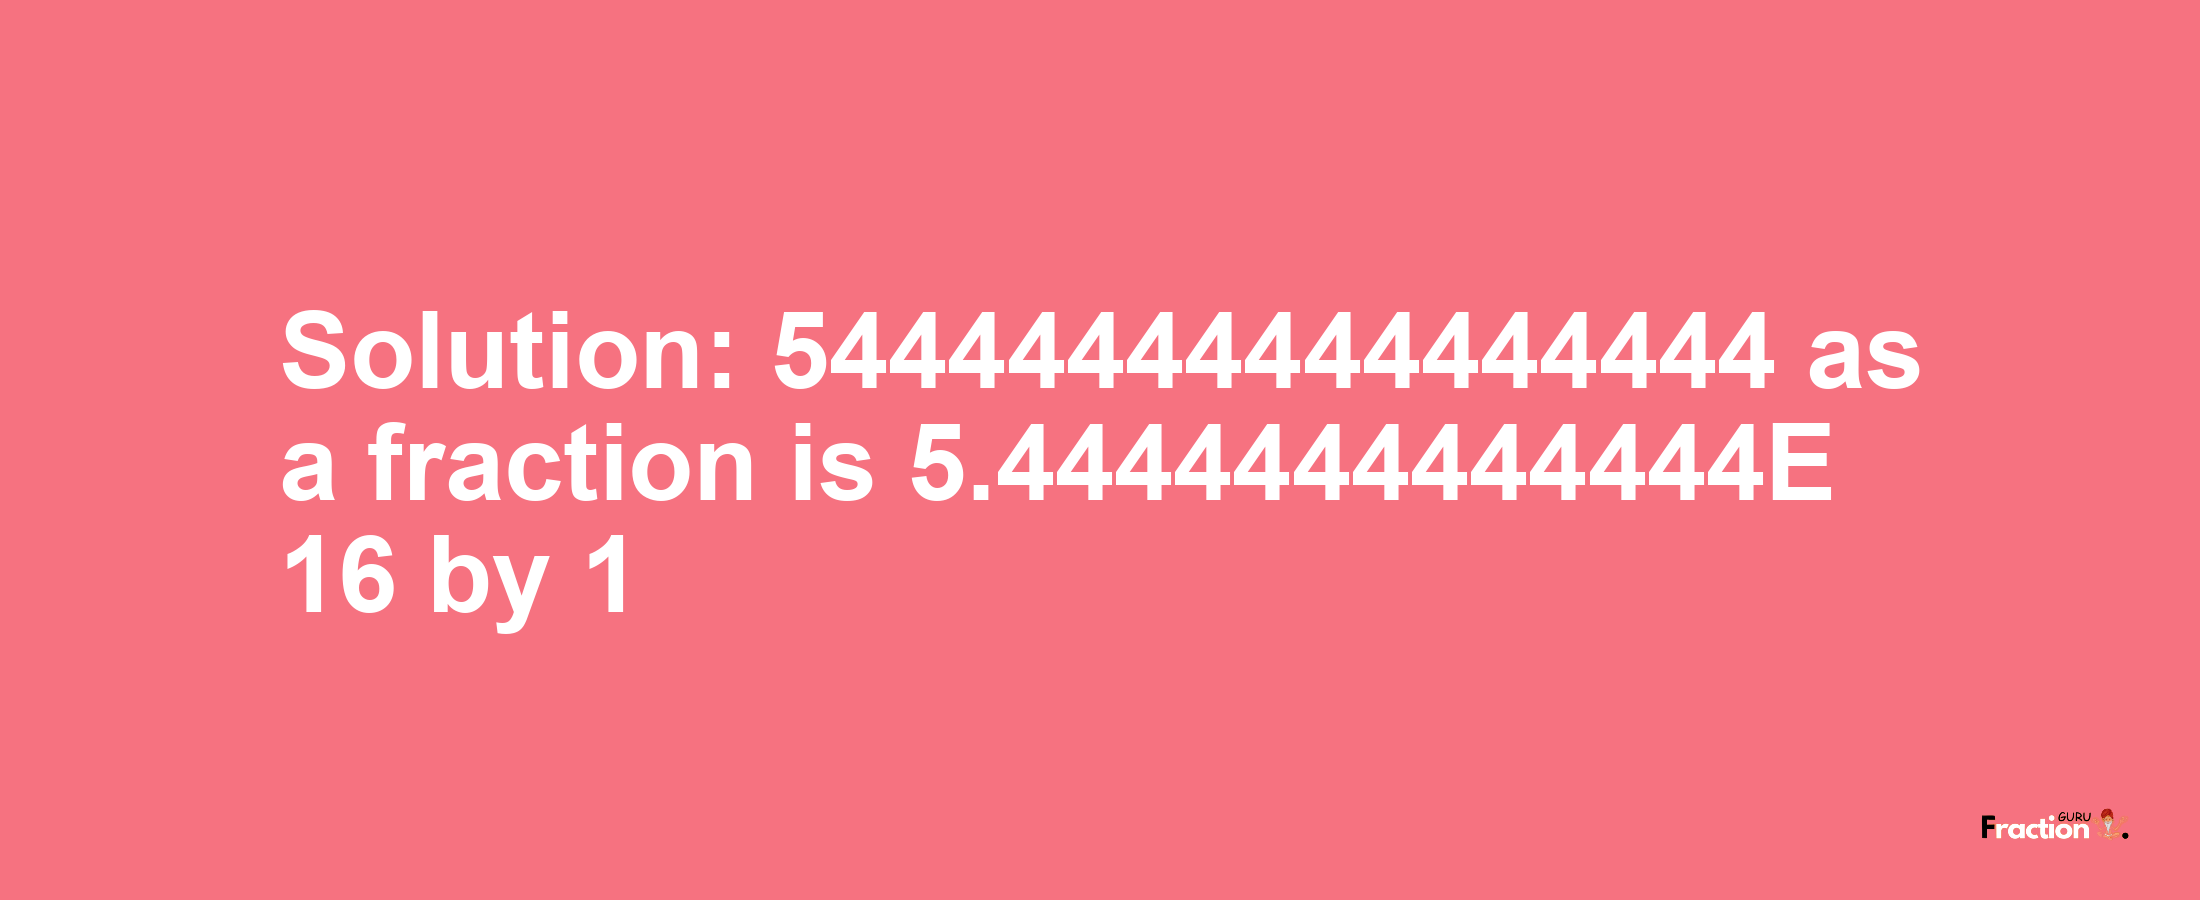 Solution:54444444444444444 as a fraction is 5.4444444444444E+16/1